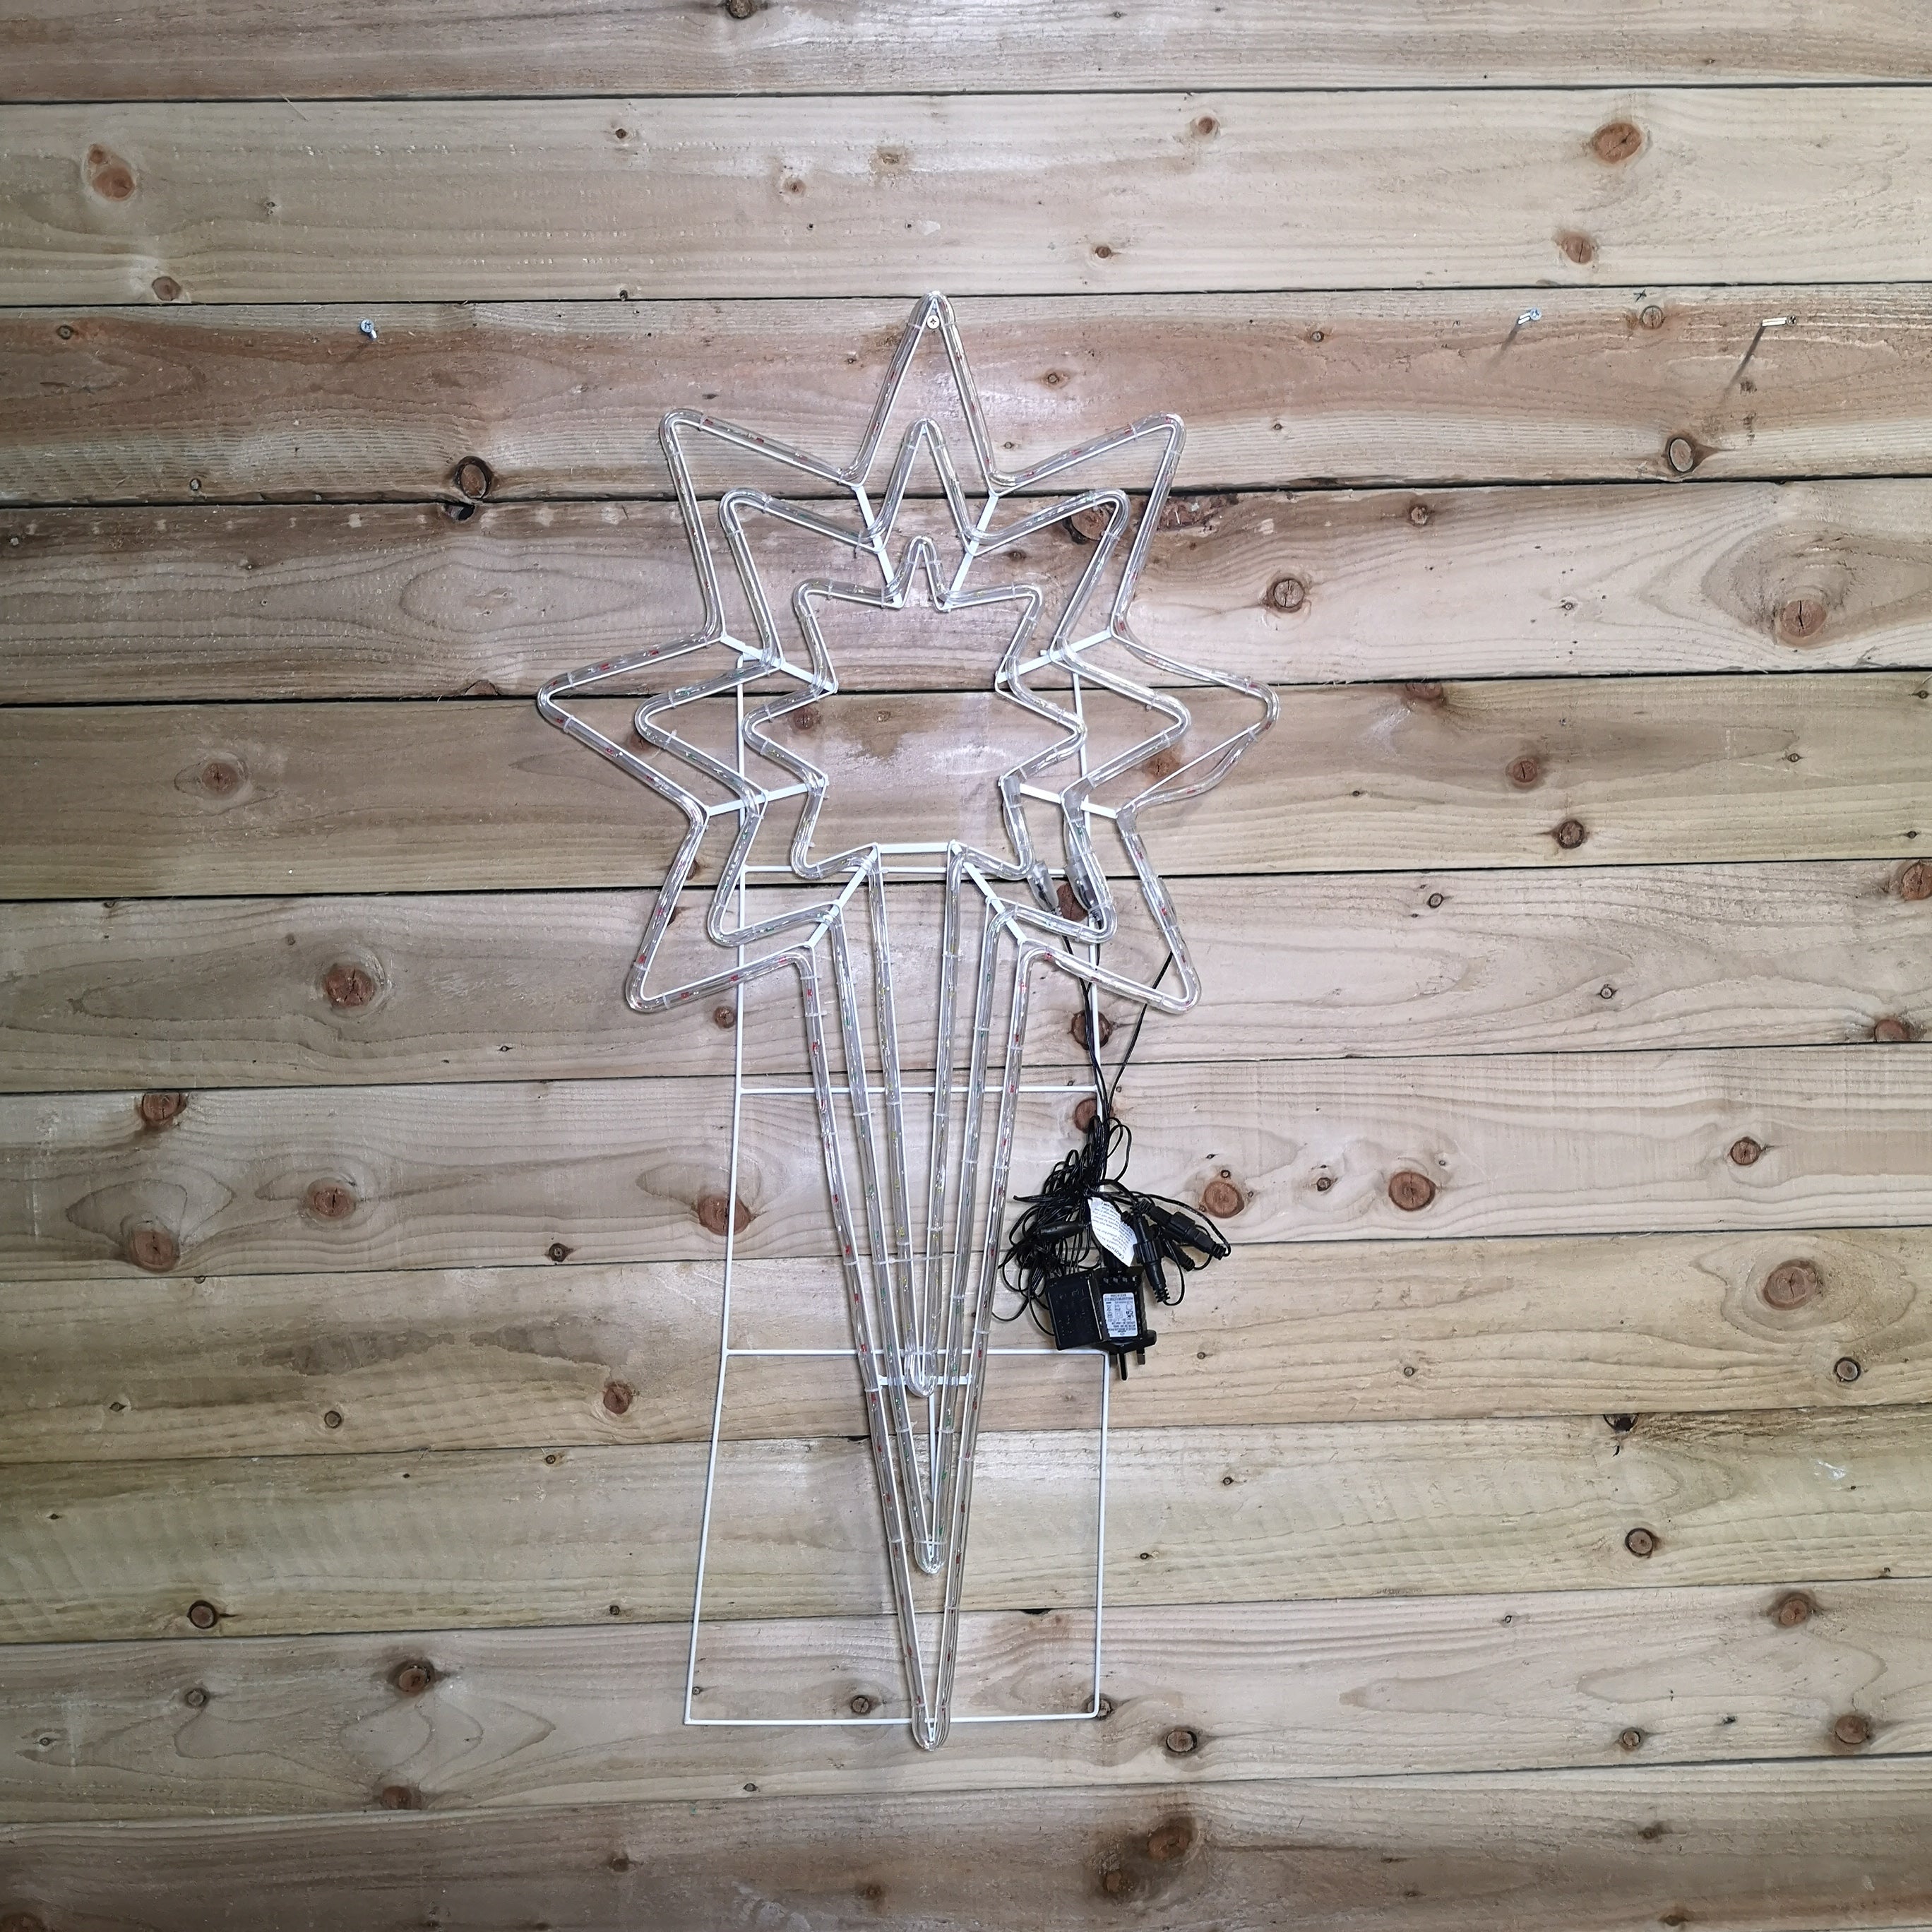 118 x 62cm LED North Star Rope Light Outdoor Christmas Silhouette in Multicoloured with Speed Controller